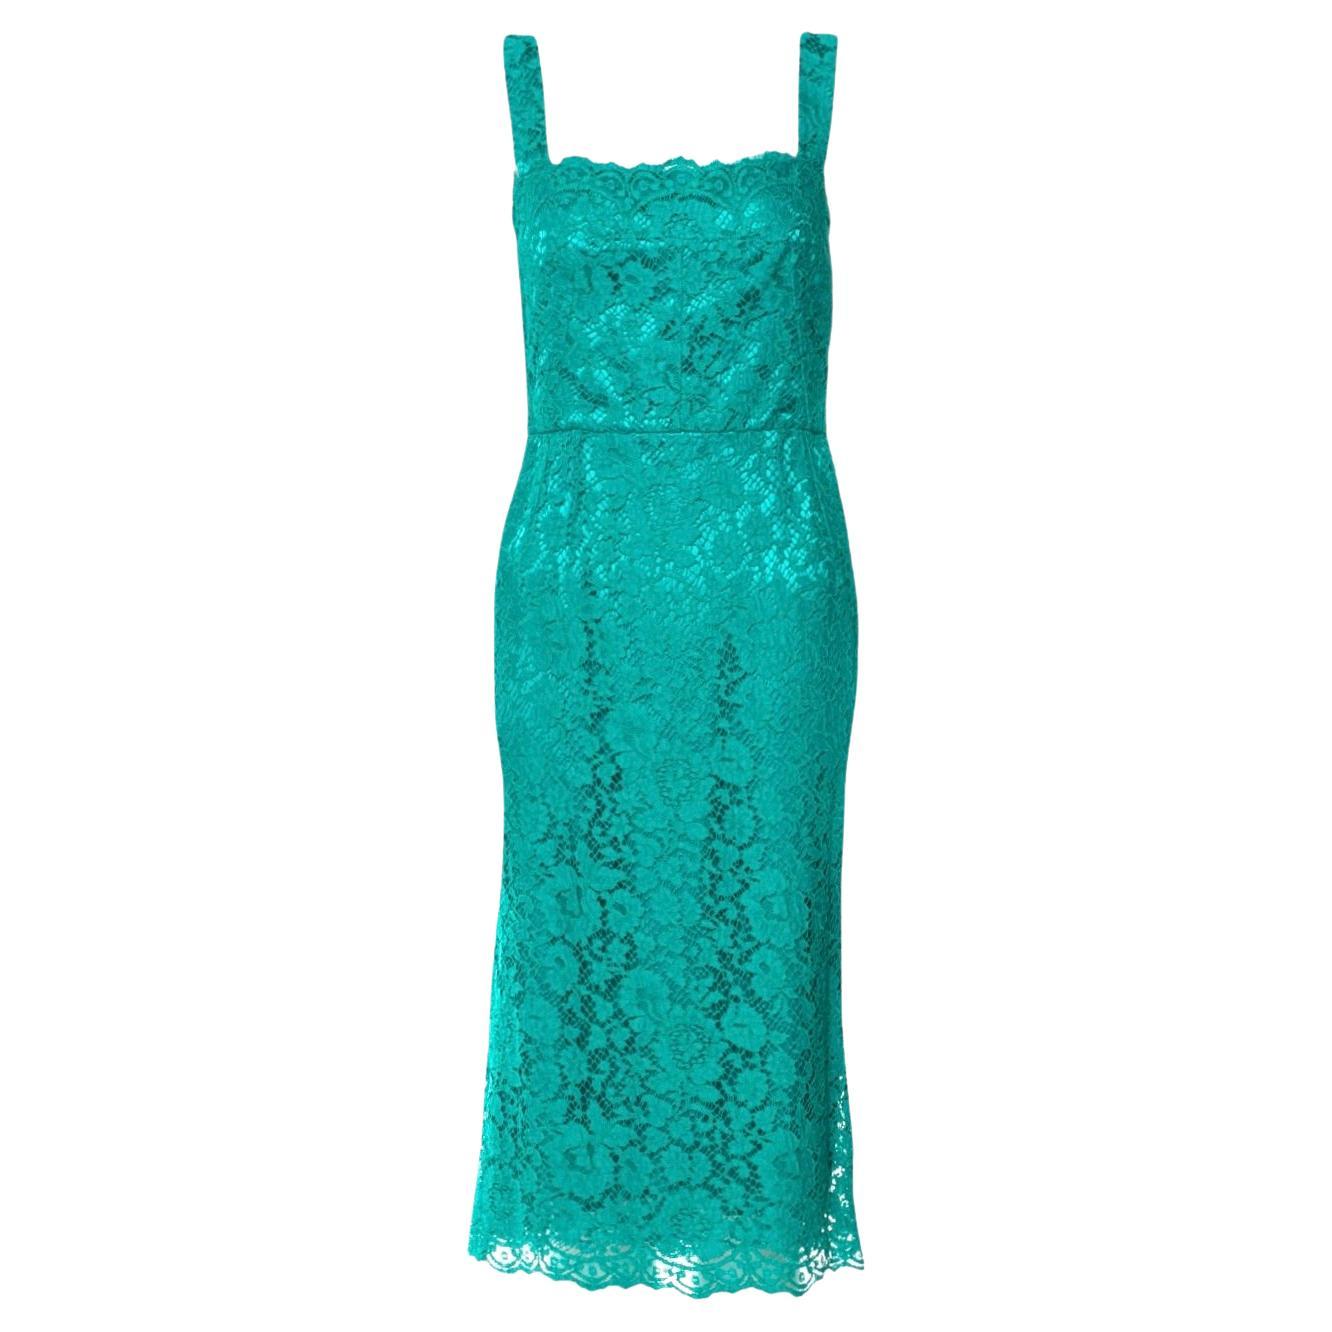 NEW Dolce & Gabbana Turquoise Aqua Lace Crystal Floral Buttons Shift Dress 40 For Sale